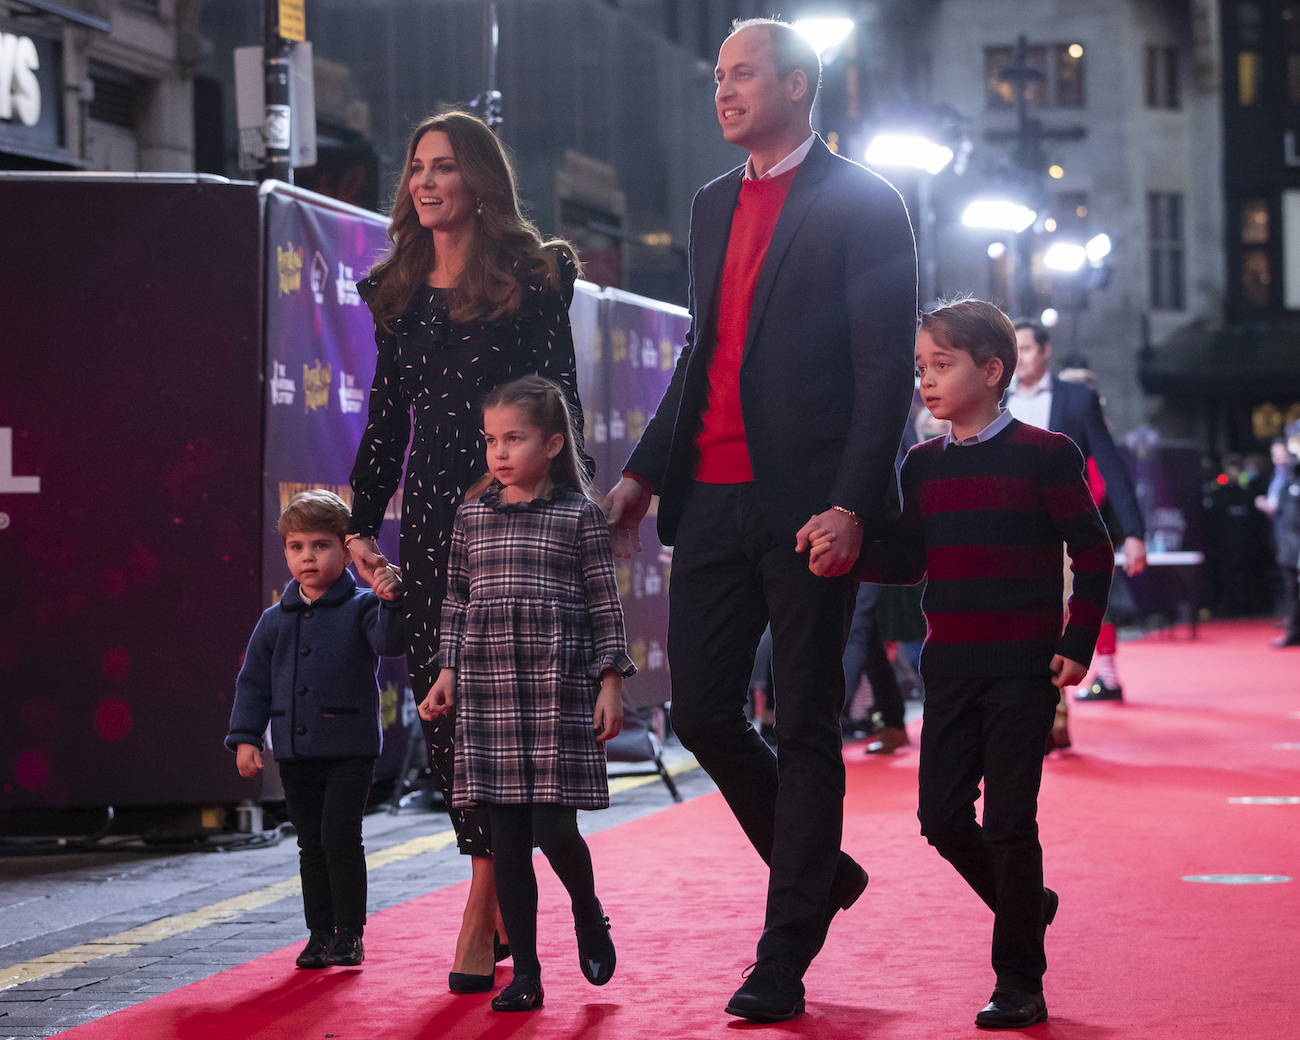 Kate Middleton and Prince William walking with Prince Louis, Prince George, and Princess Charlotte on a red carpet